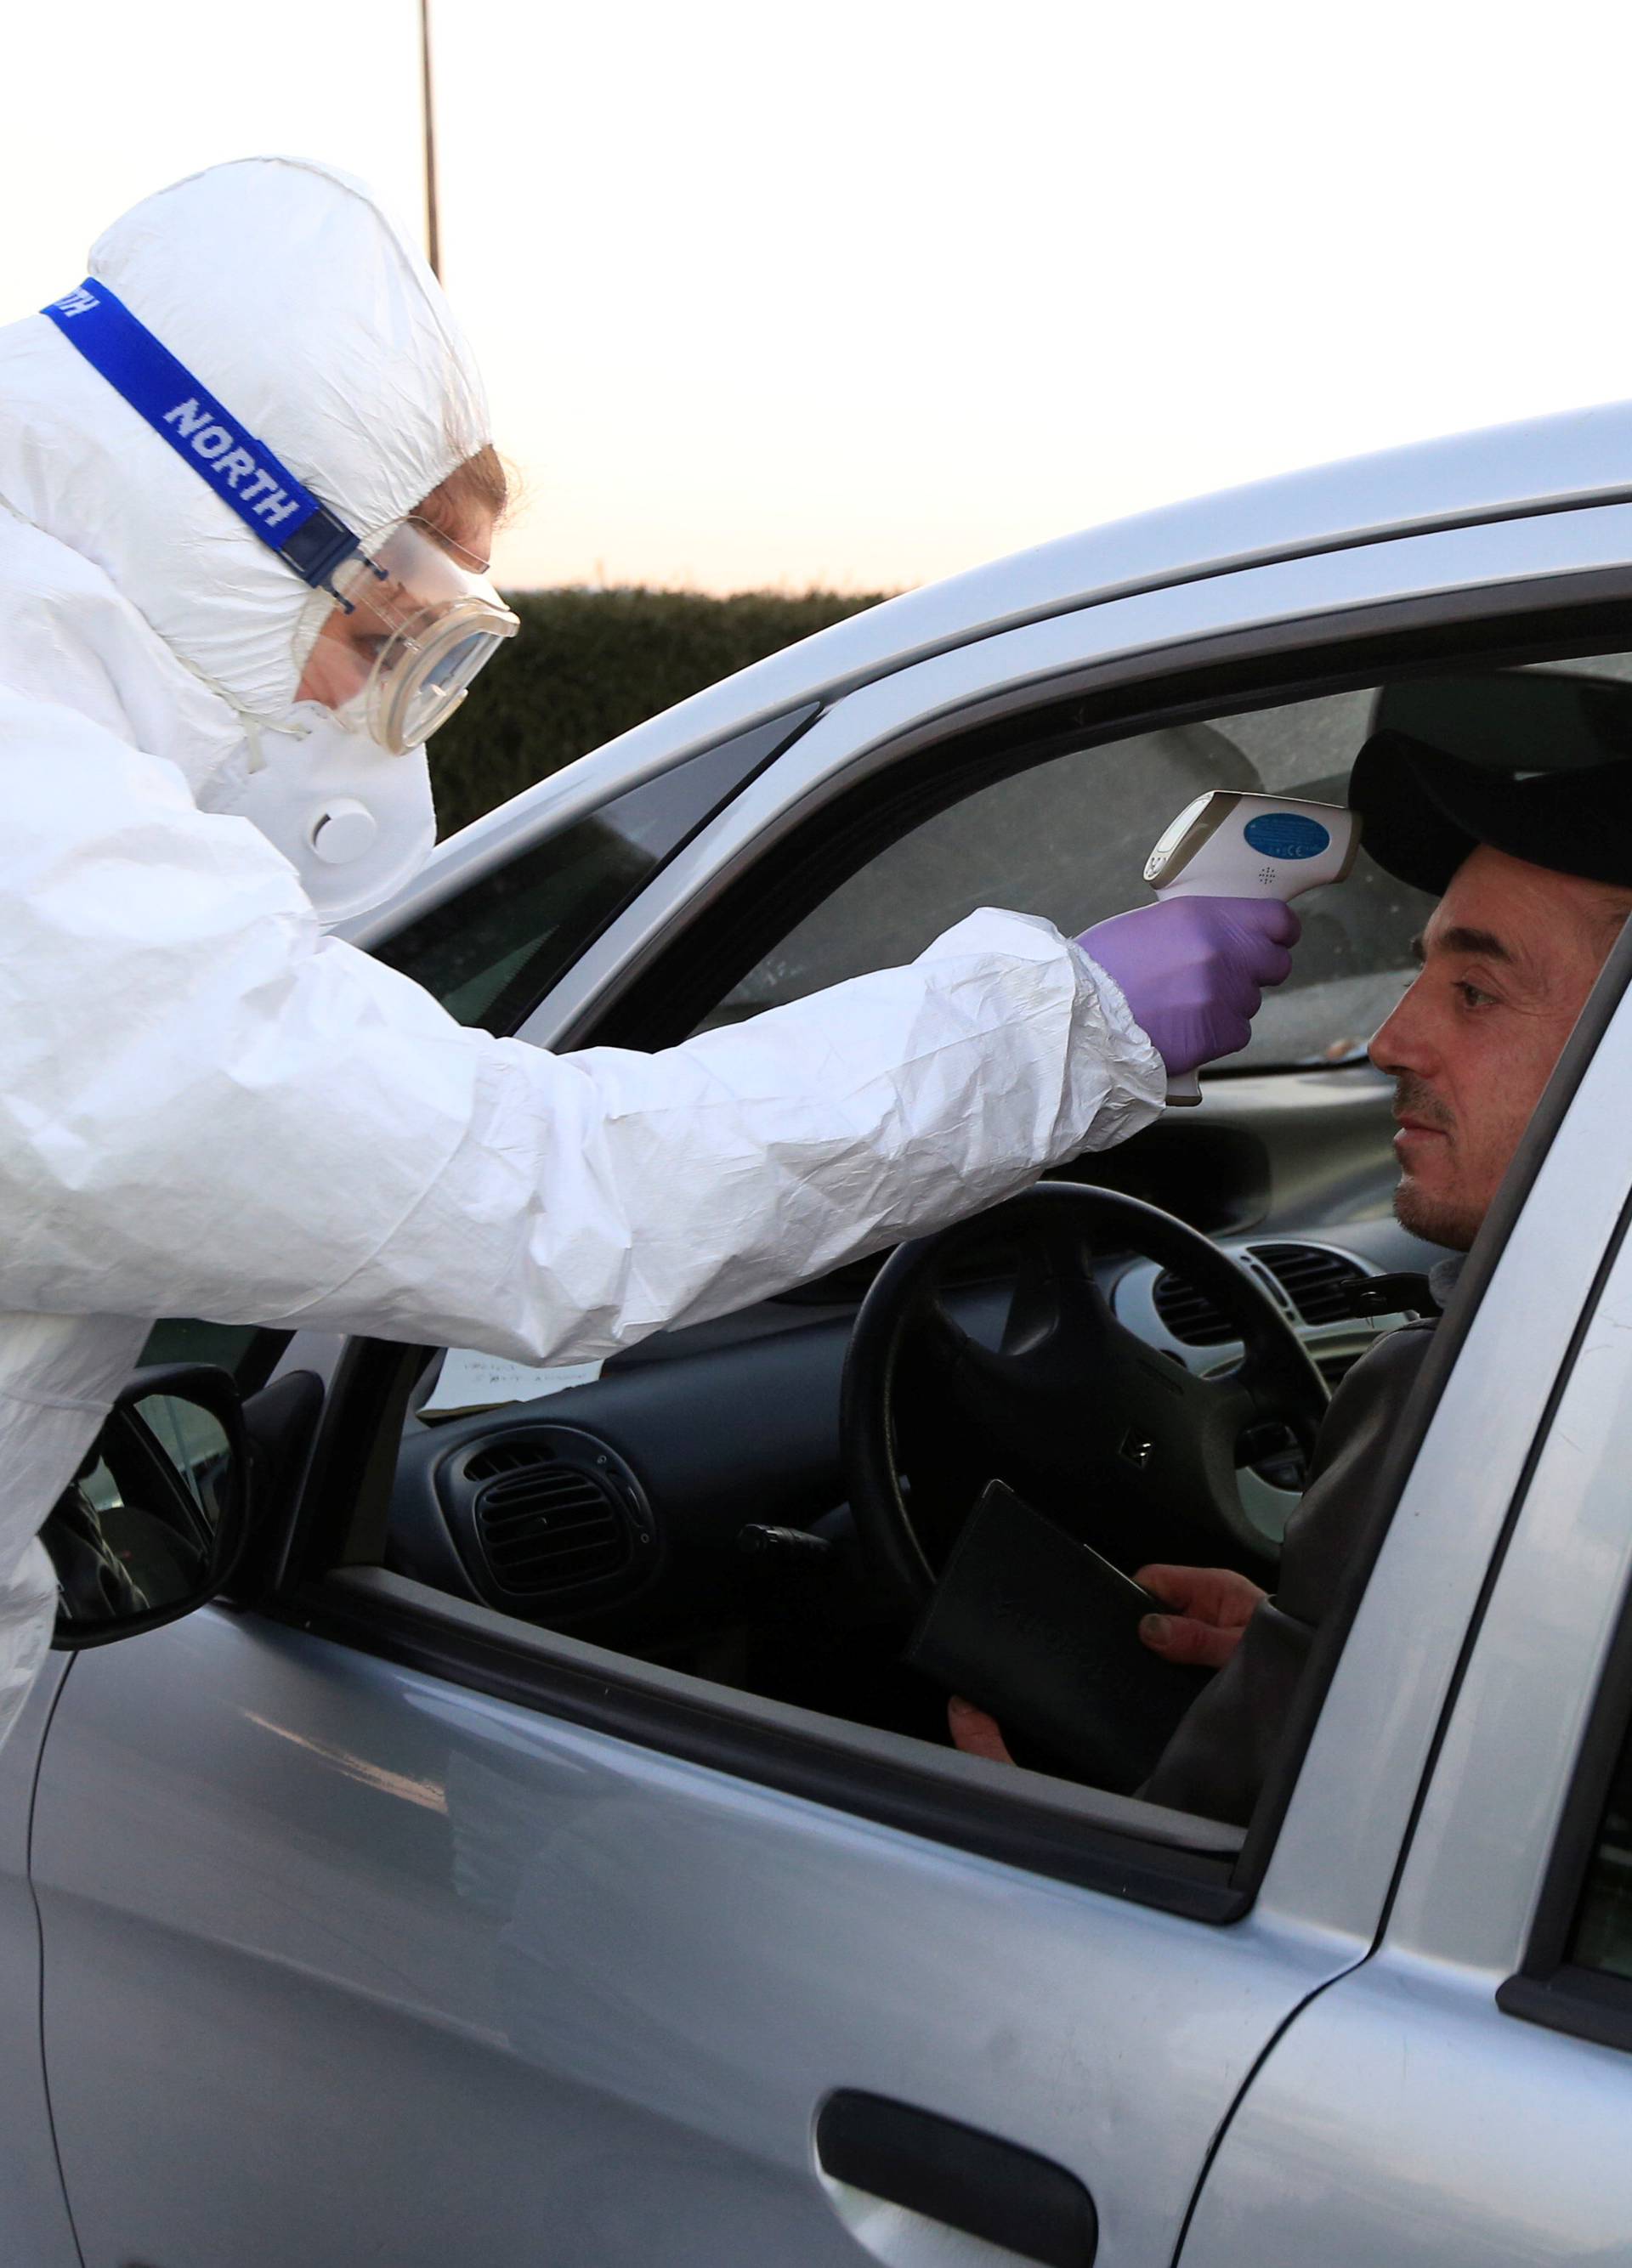 Medical staff checks a passenger in a car for coronavirus (COVID-19) at the border crossing with Italy in Vrtojba